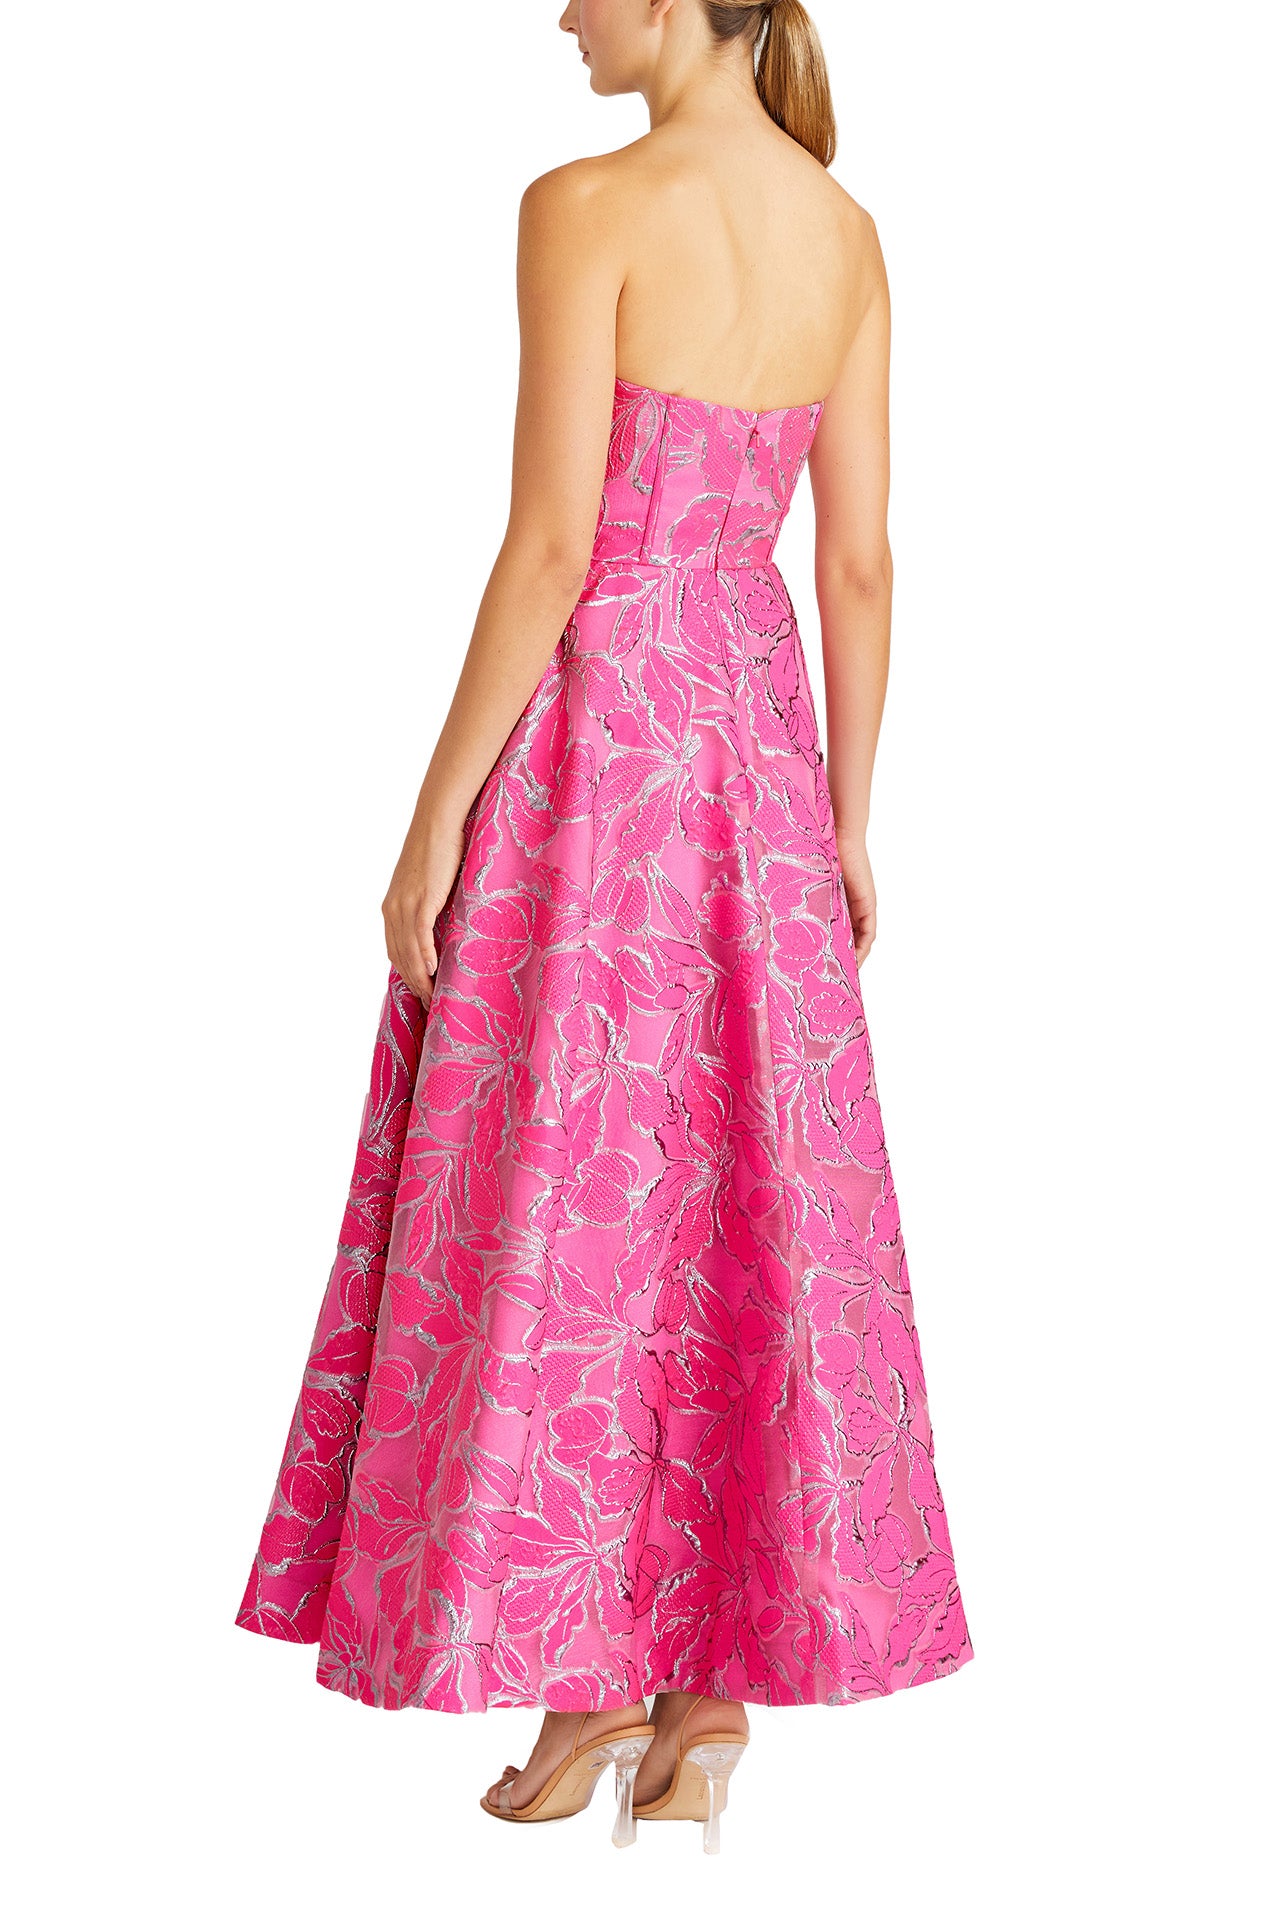 ML Monique Lhuillier Summer 2024 Strapless, metallic pink organza jacquard midi dress with sweetheart neckline and boning in bodice - back.